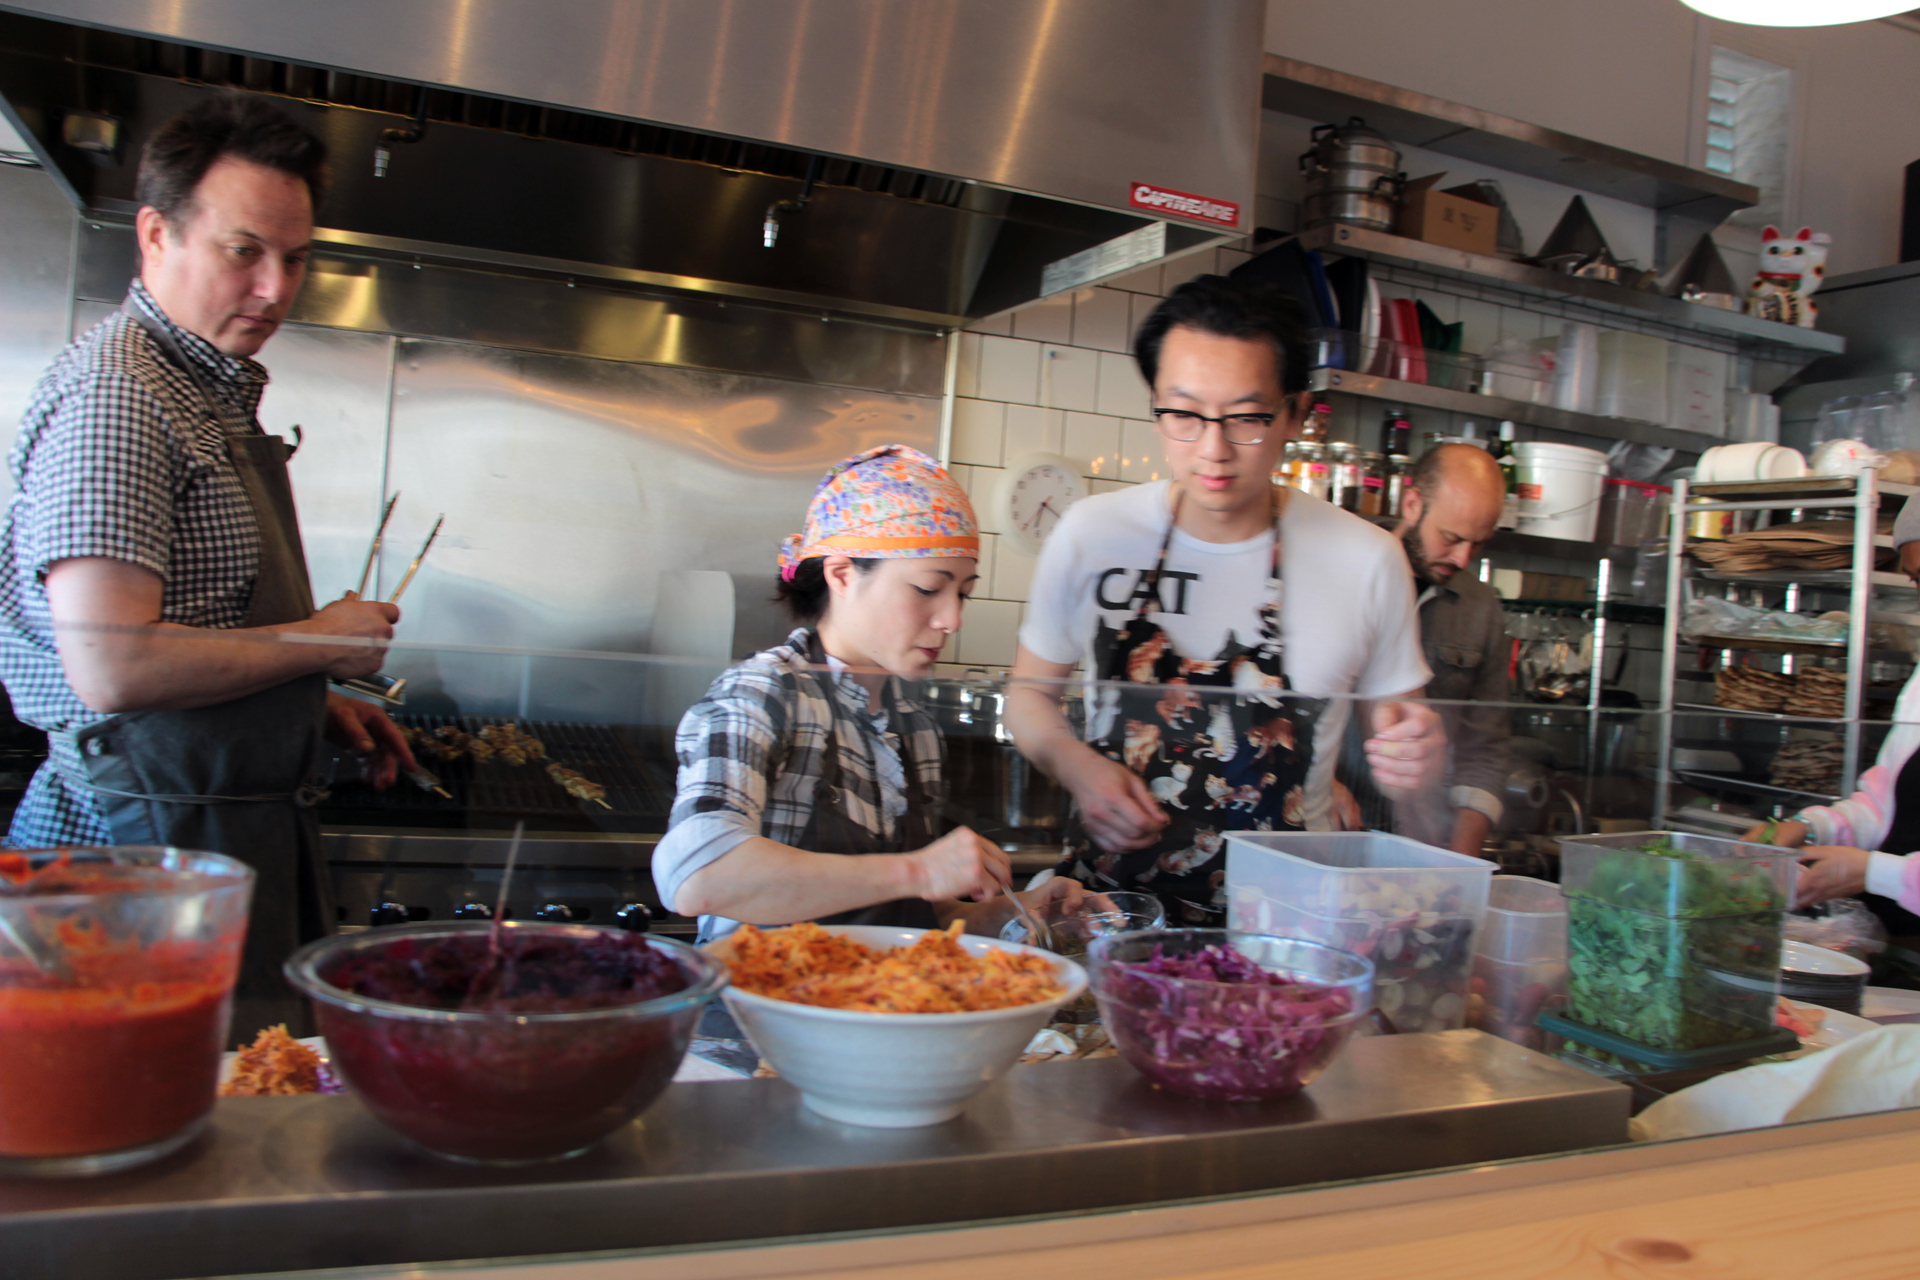 Chef/Owner Russell Moore (left) Chef Traci Matsumoto-Esteban (2nd from left), Brian Crookes (far right).